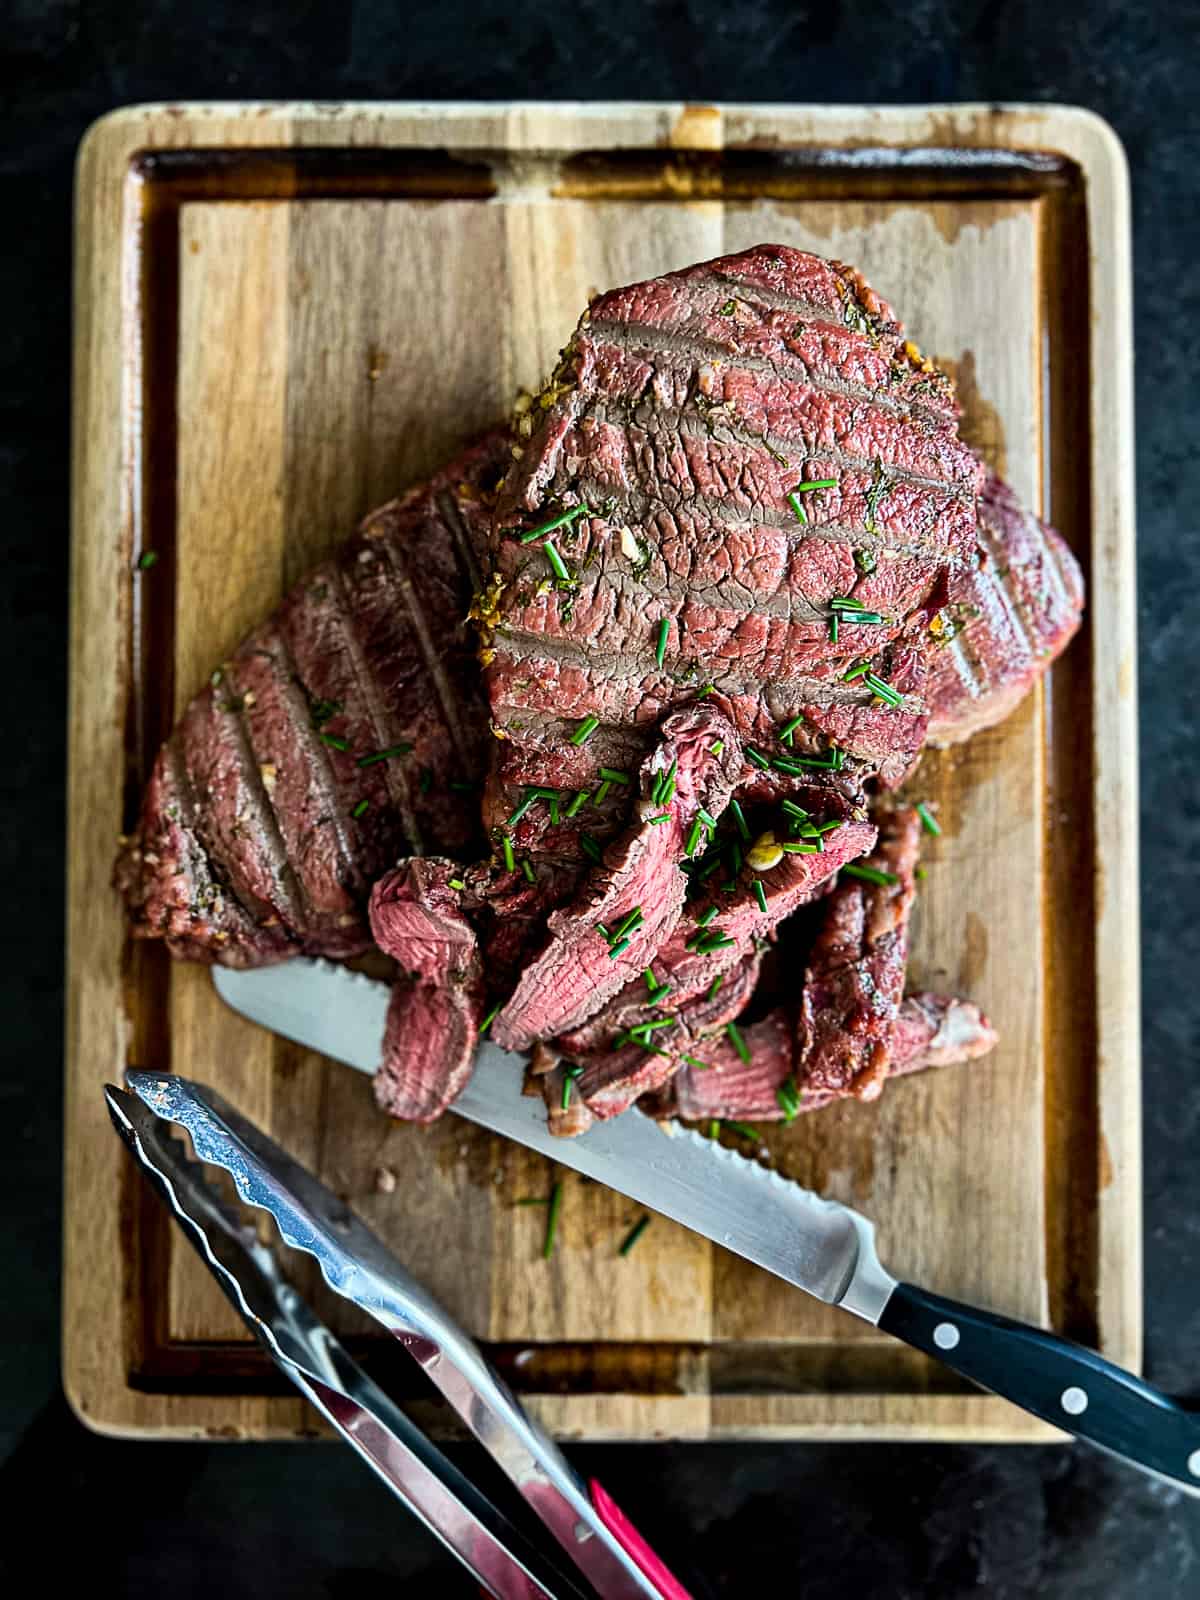 Sliced Traeger Sirloin Steak with fresh herbs and a cutting knife